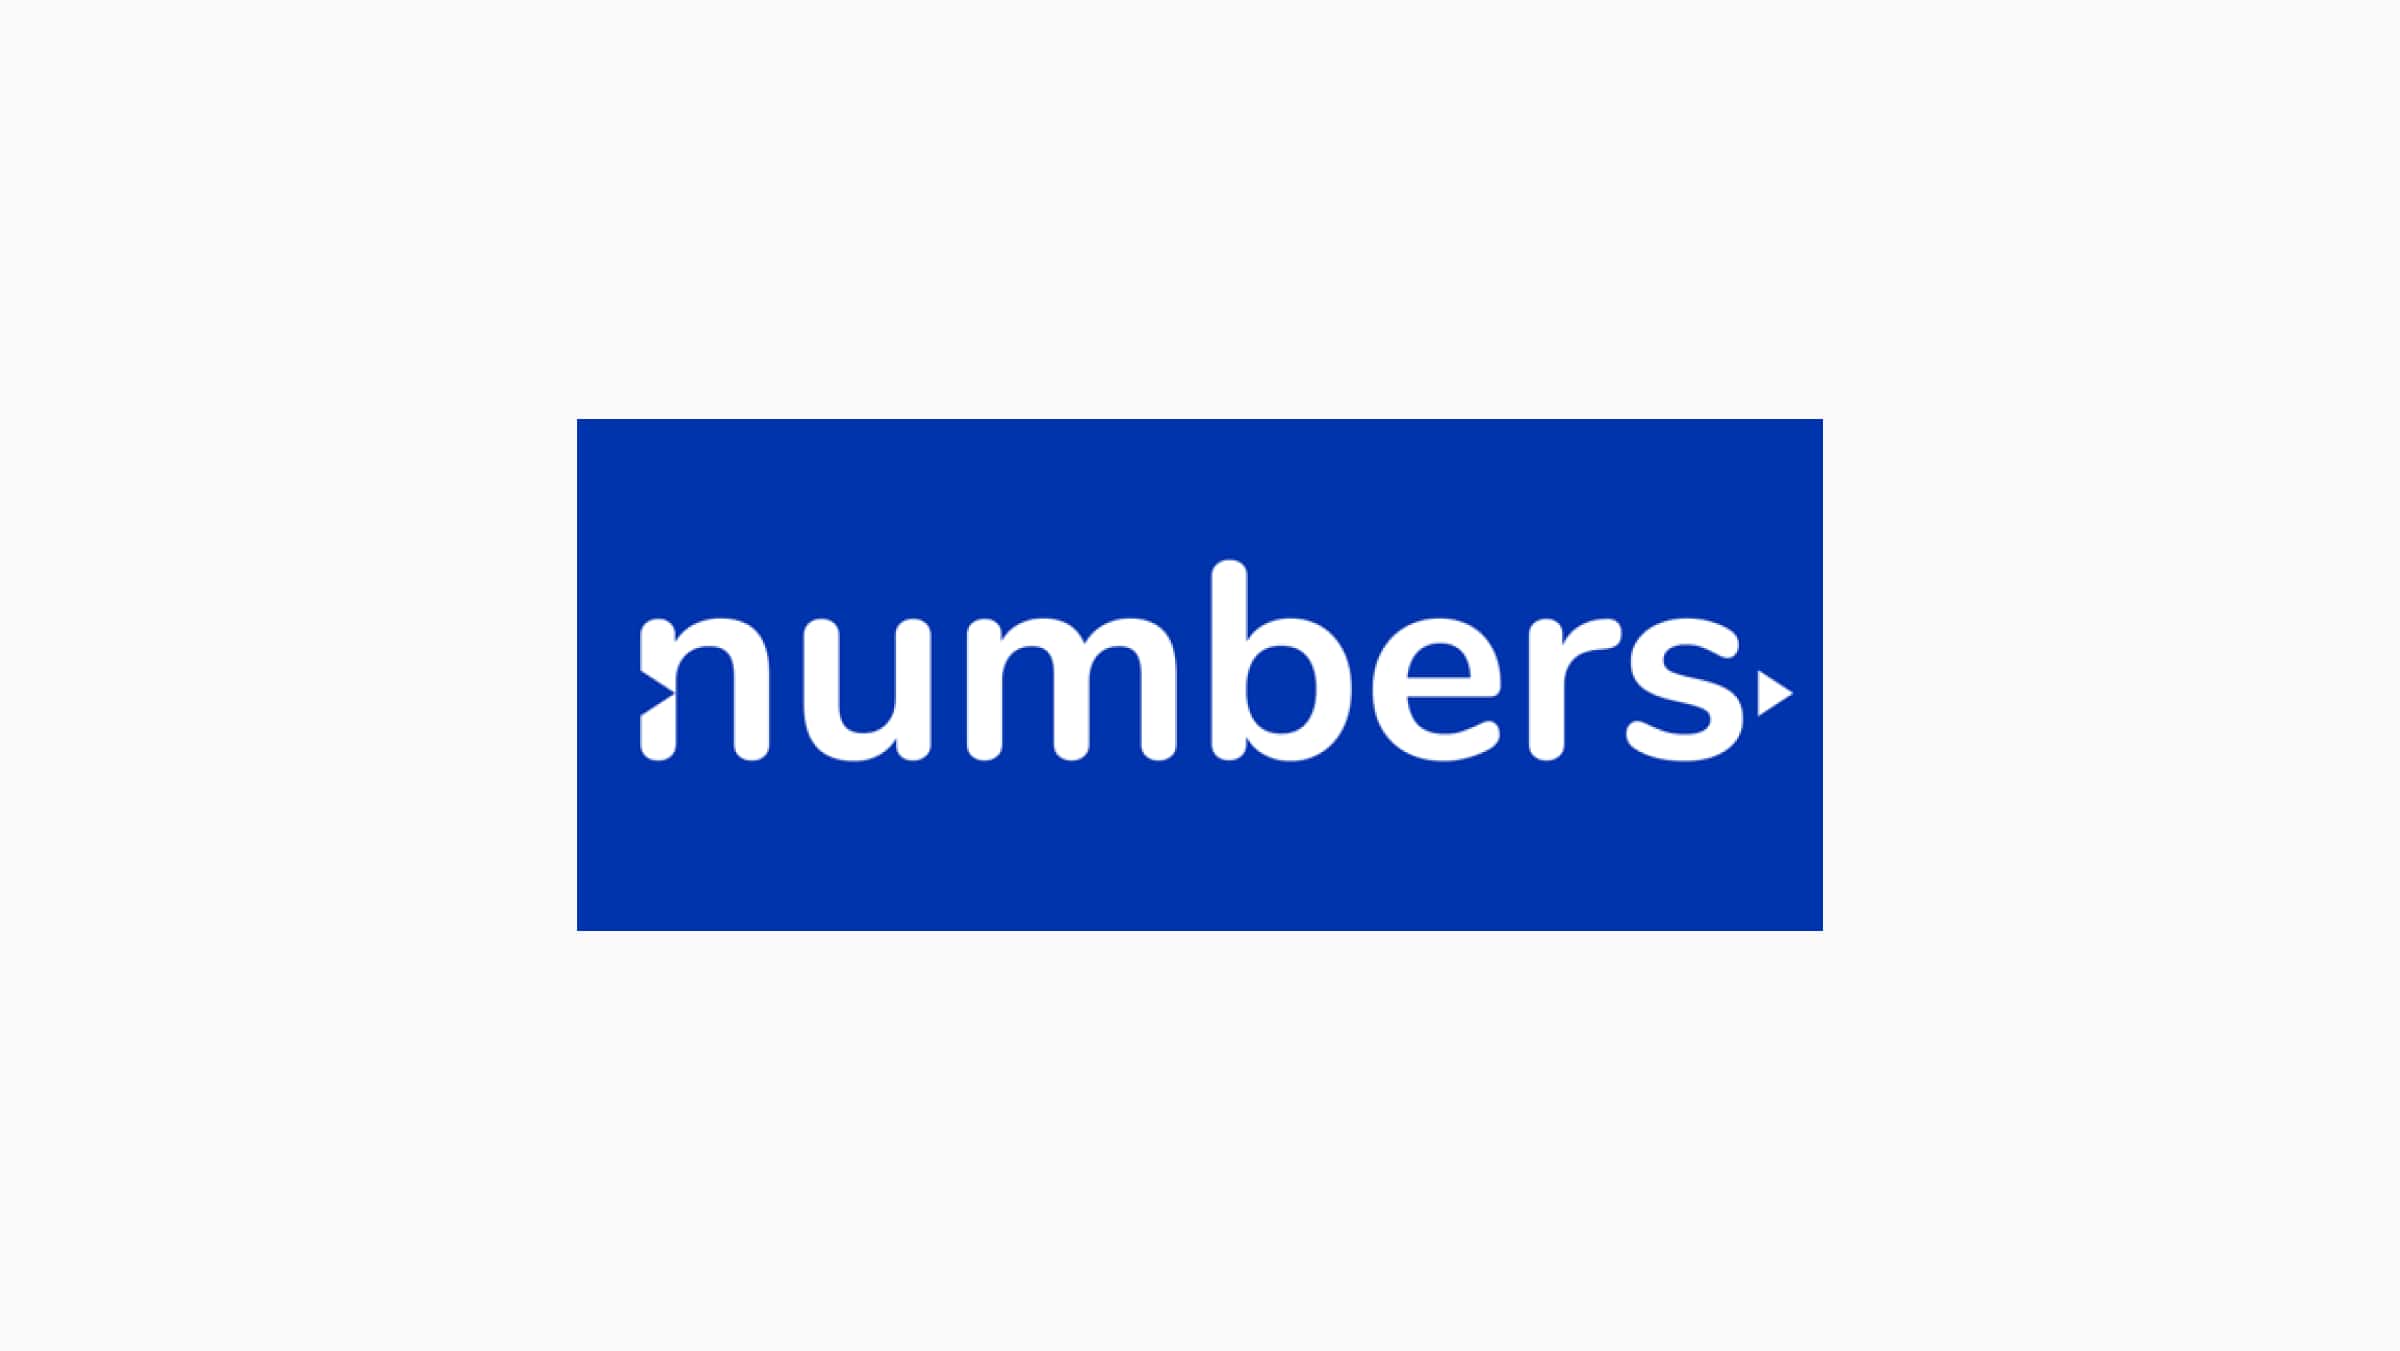 The Numbers Management logo